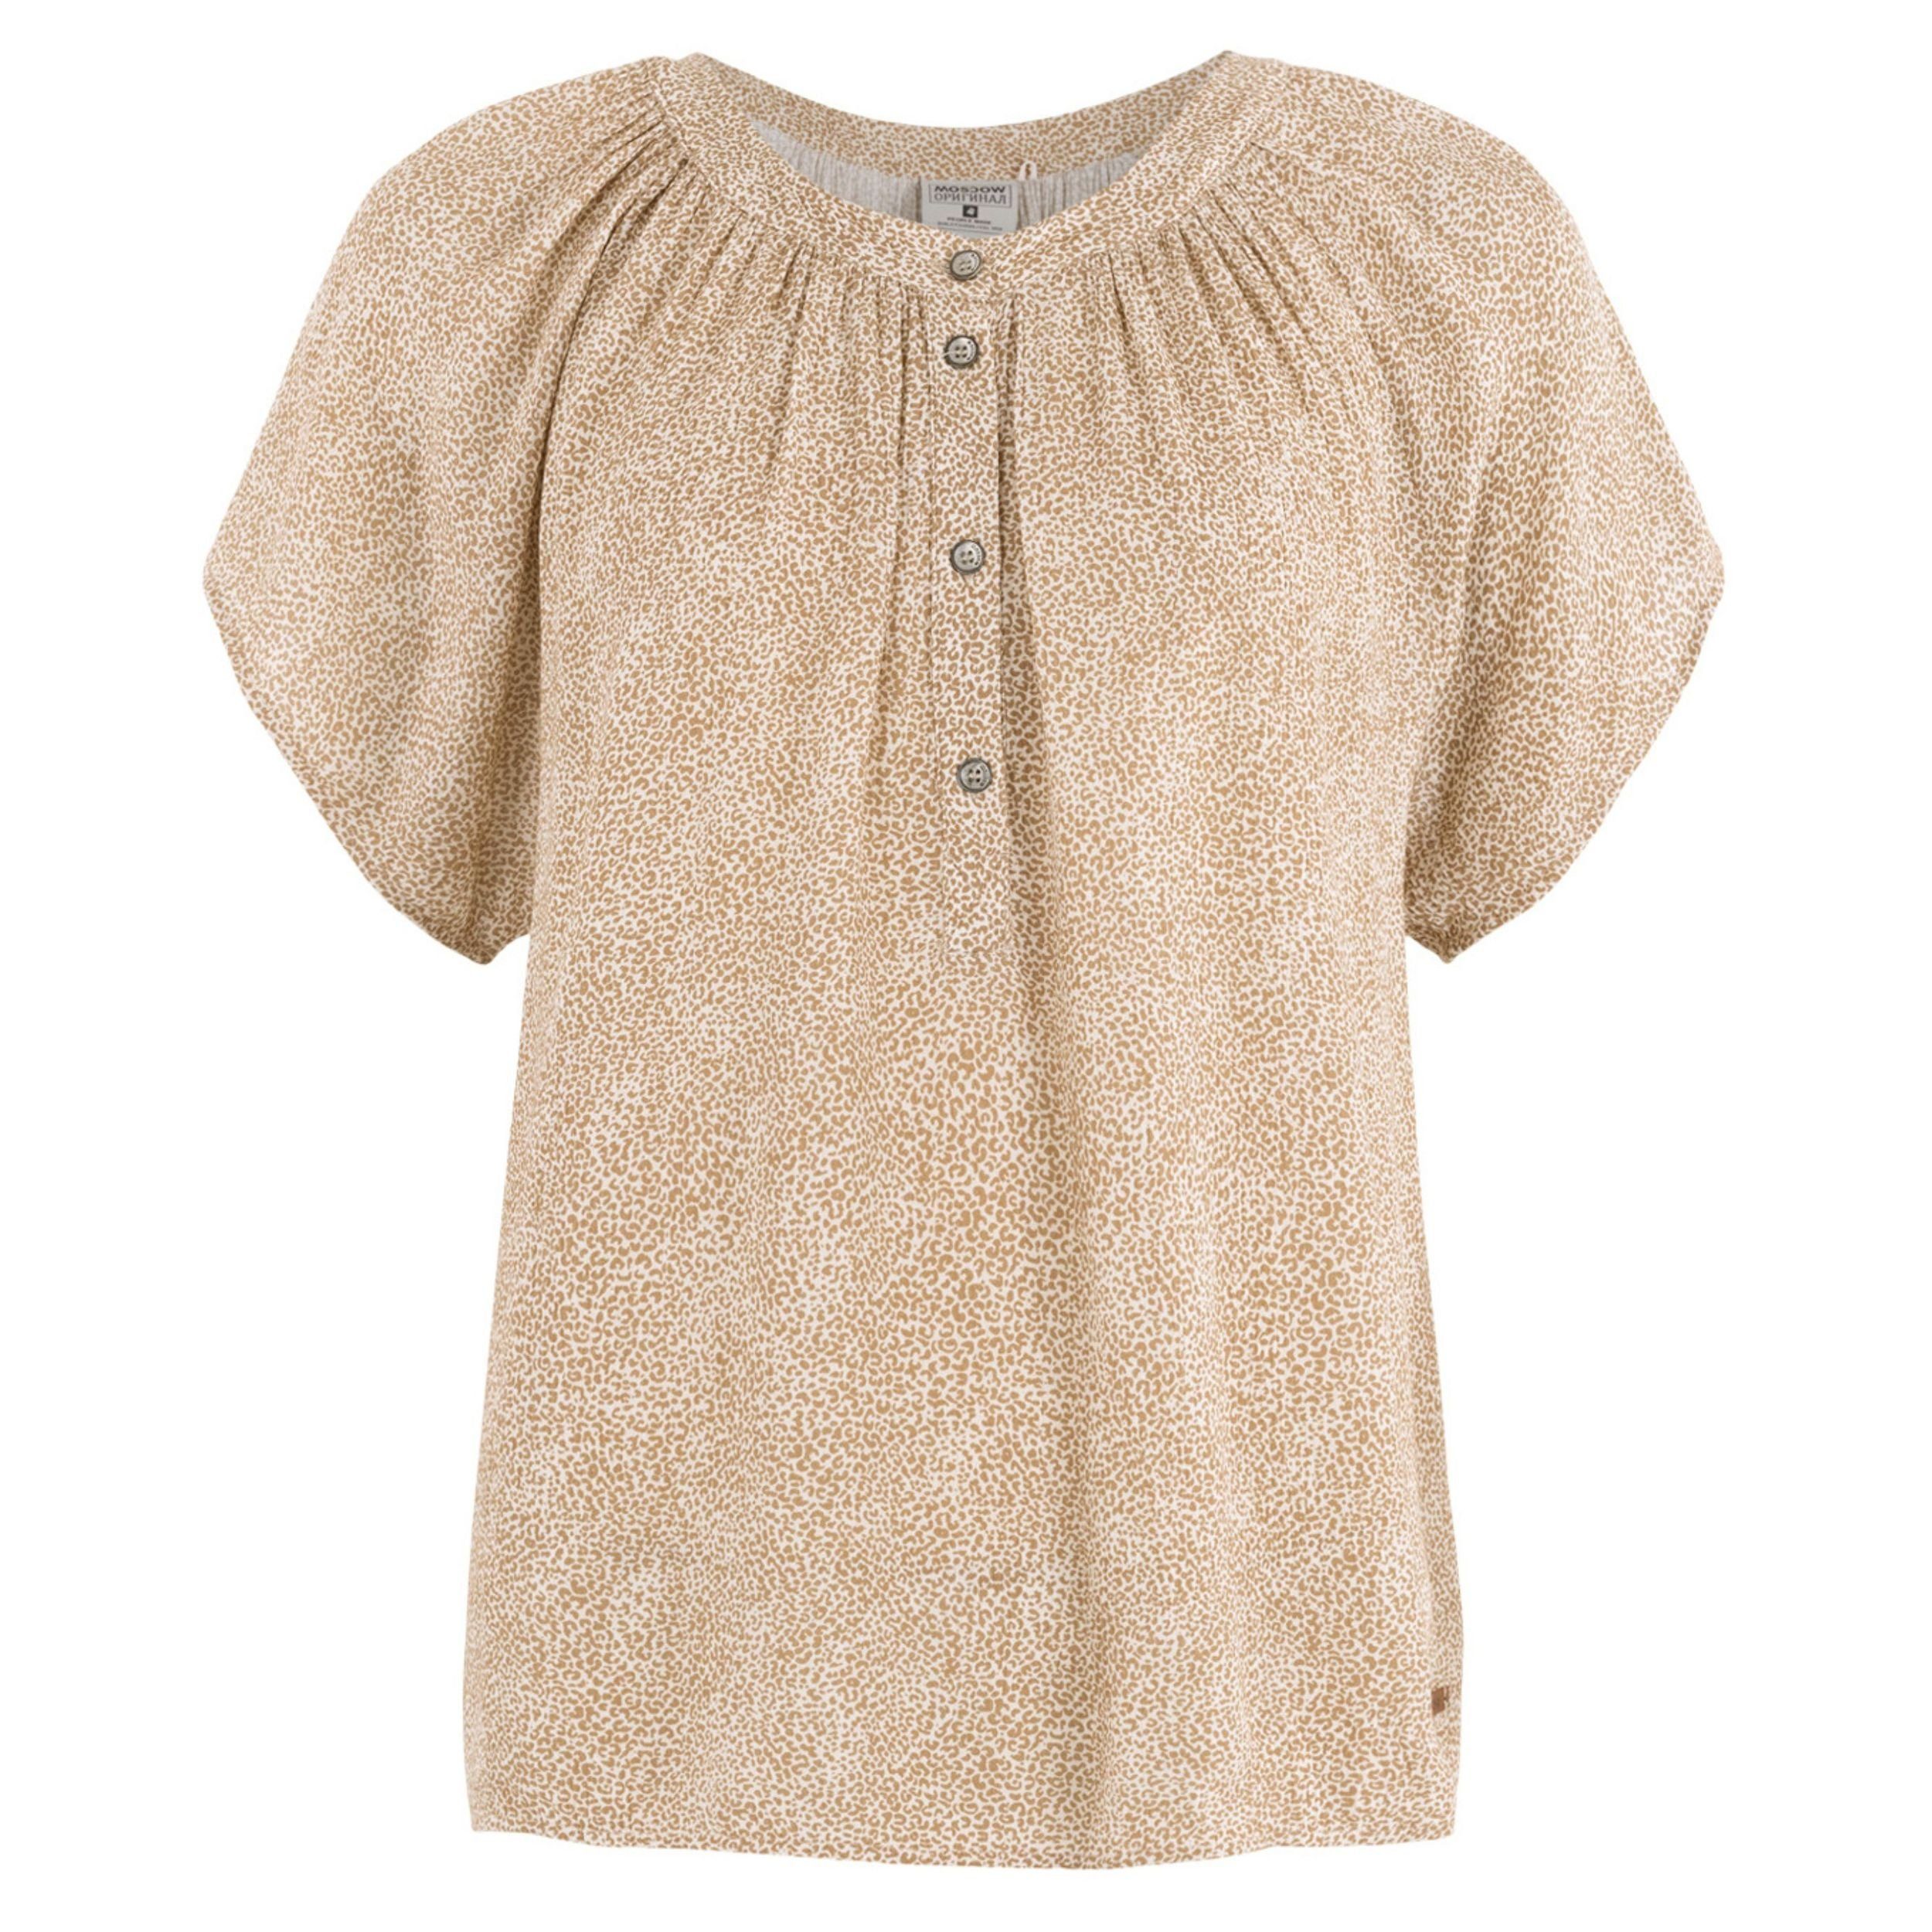 Moscow Design Druckbluse Romana Bluse in Creme mit Leopard Muster in lässiger Form